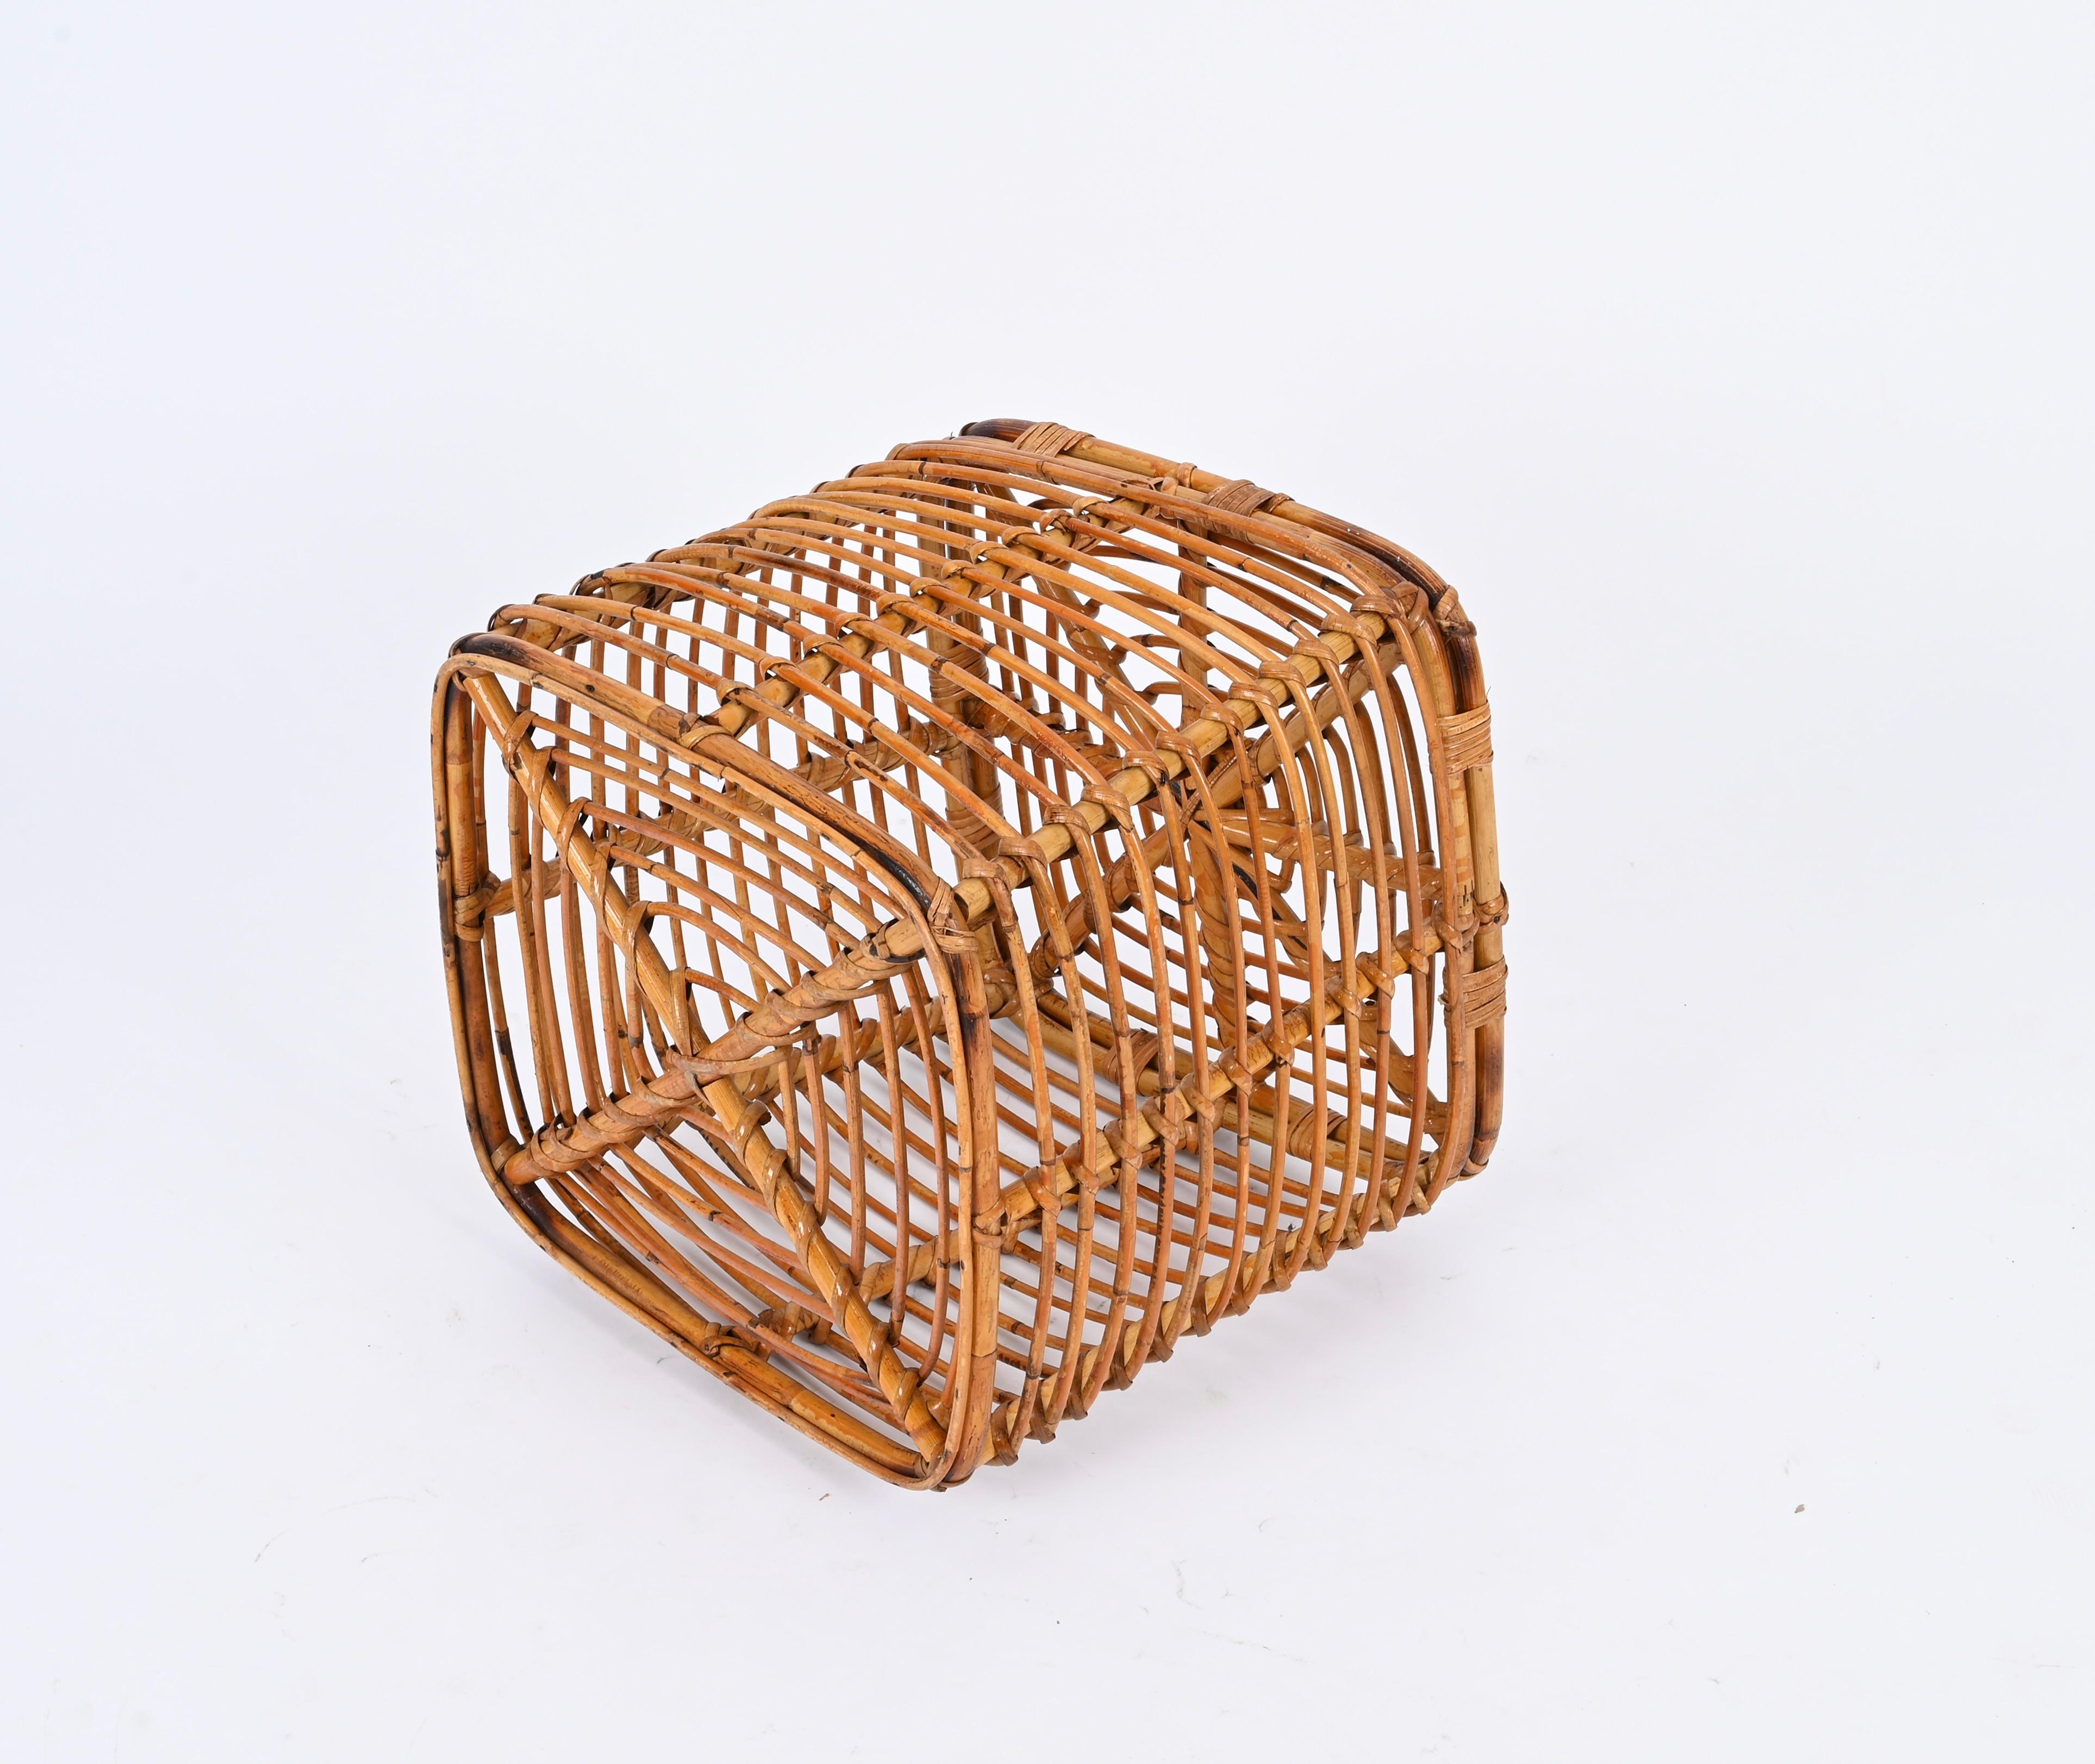 Midcentury Tito Agnoli Rattan and Wicker Square Pouf Stool, Italy, 1970s For Sale 5